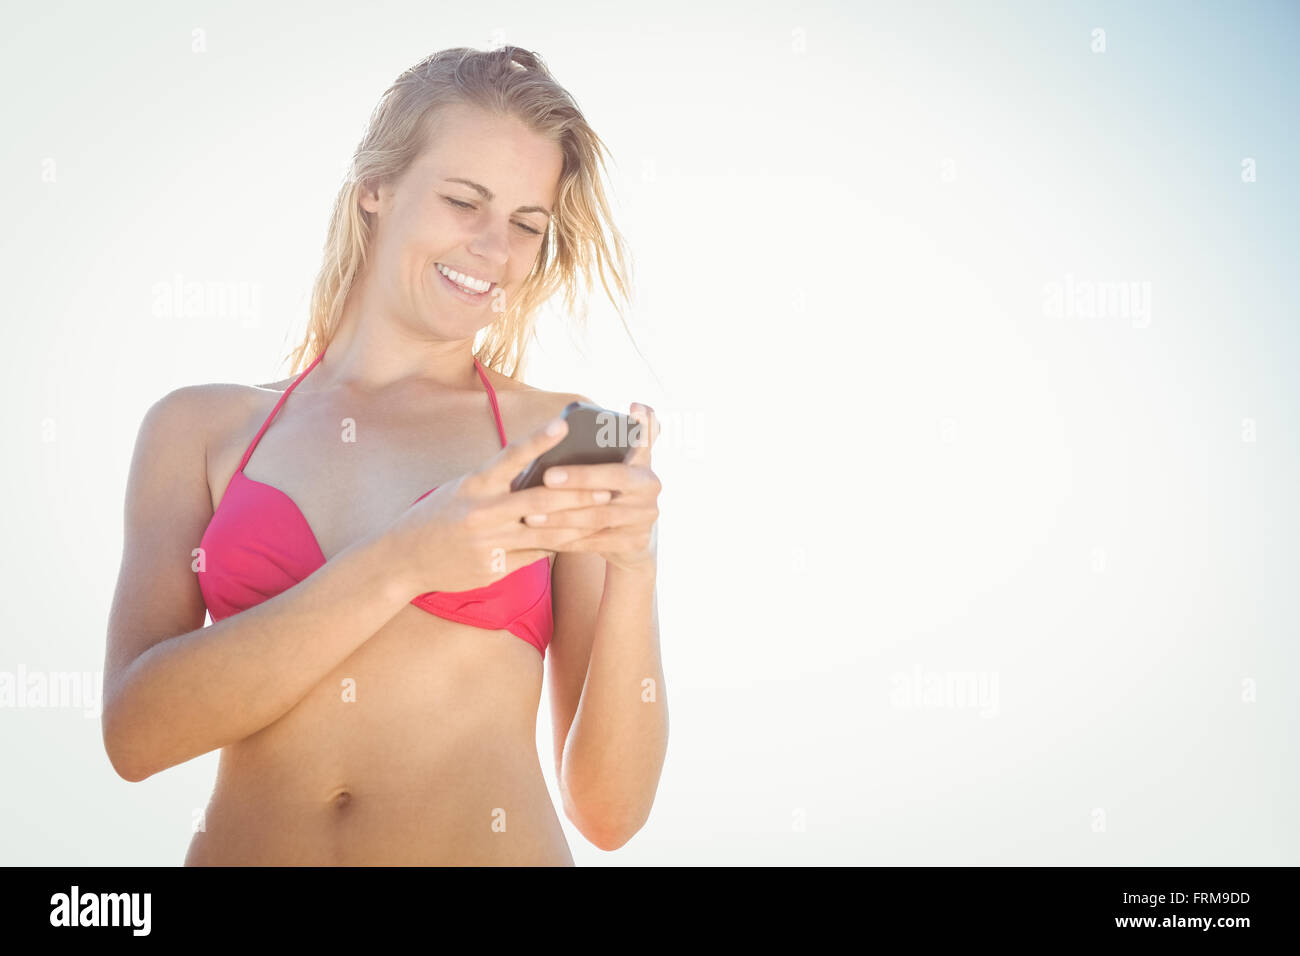 Blonde woman using smartphone Banque D'Images